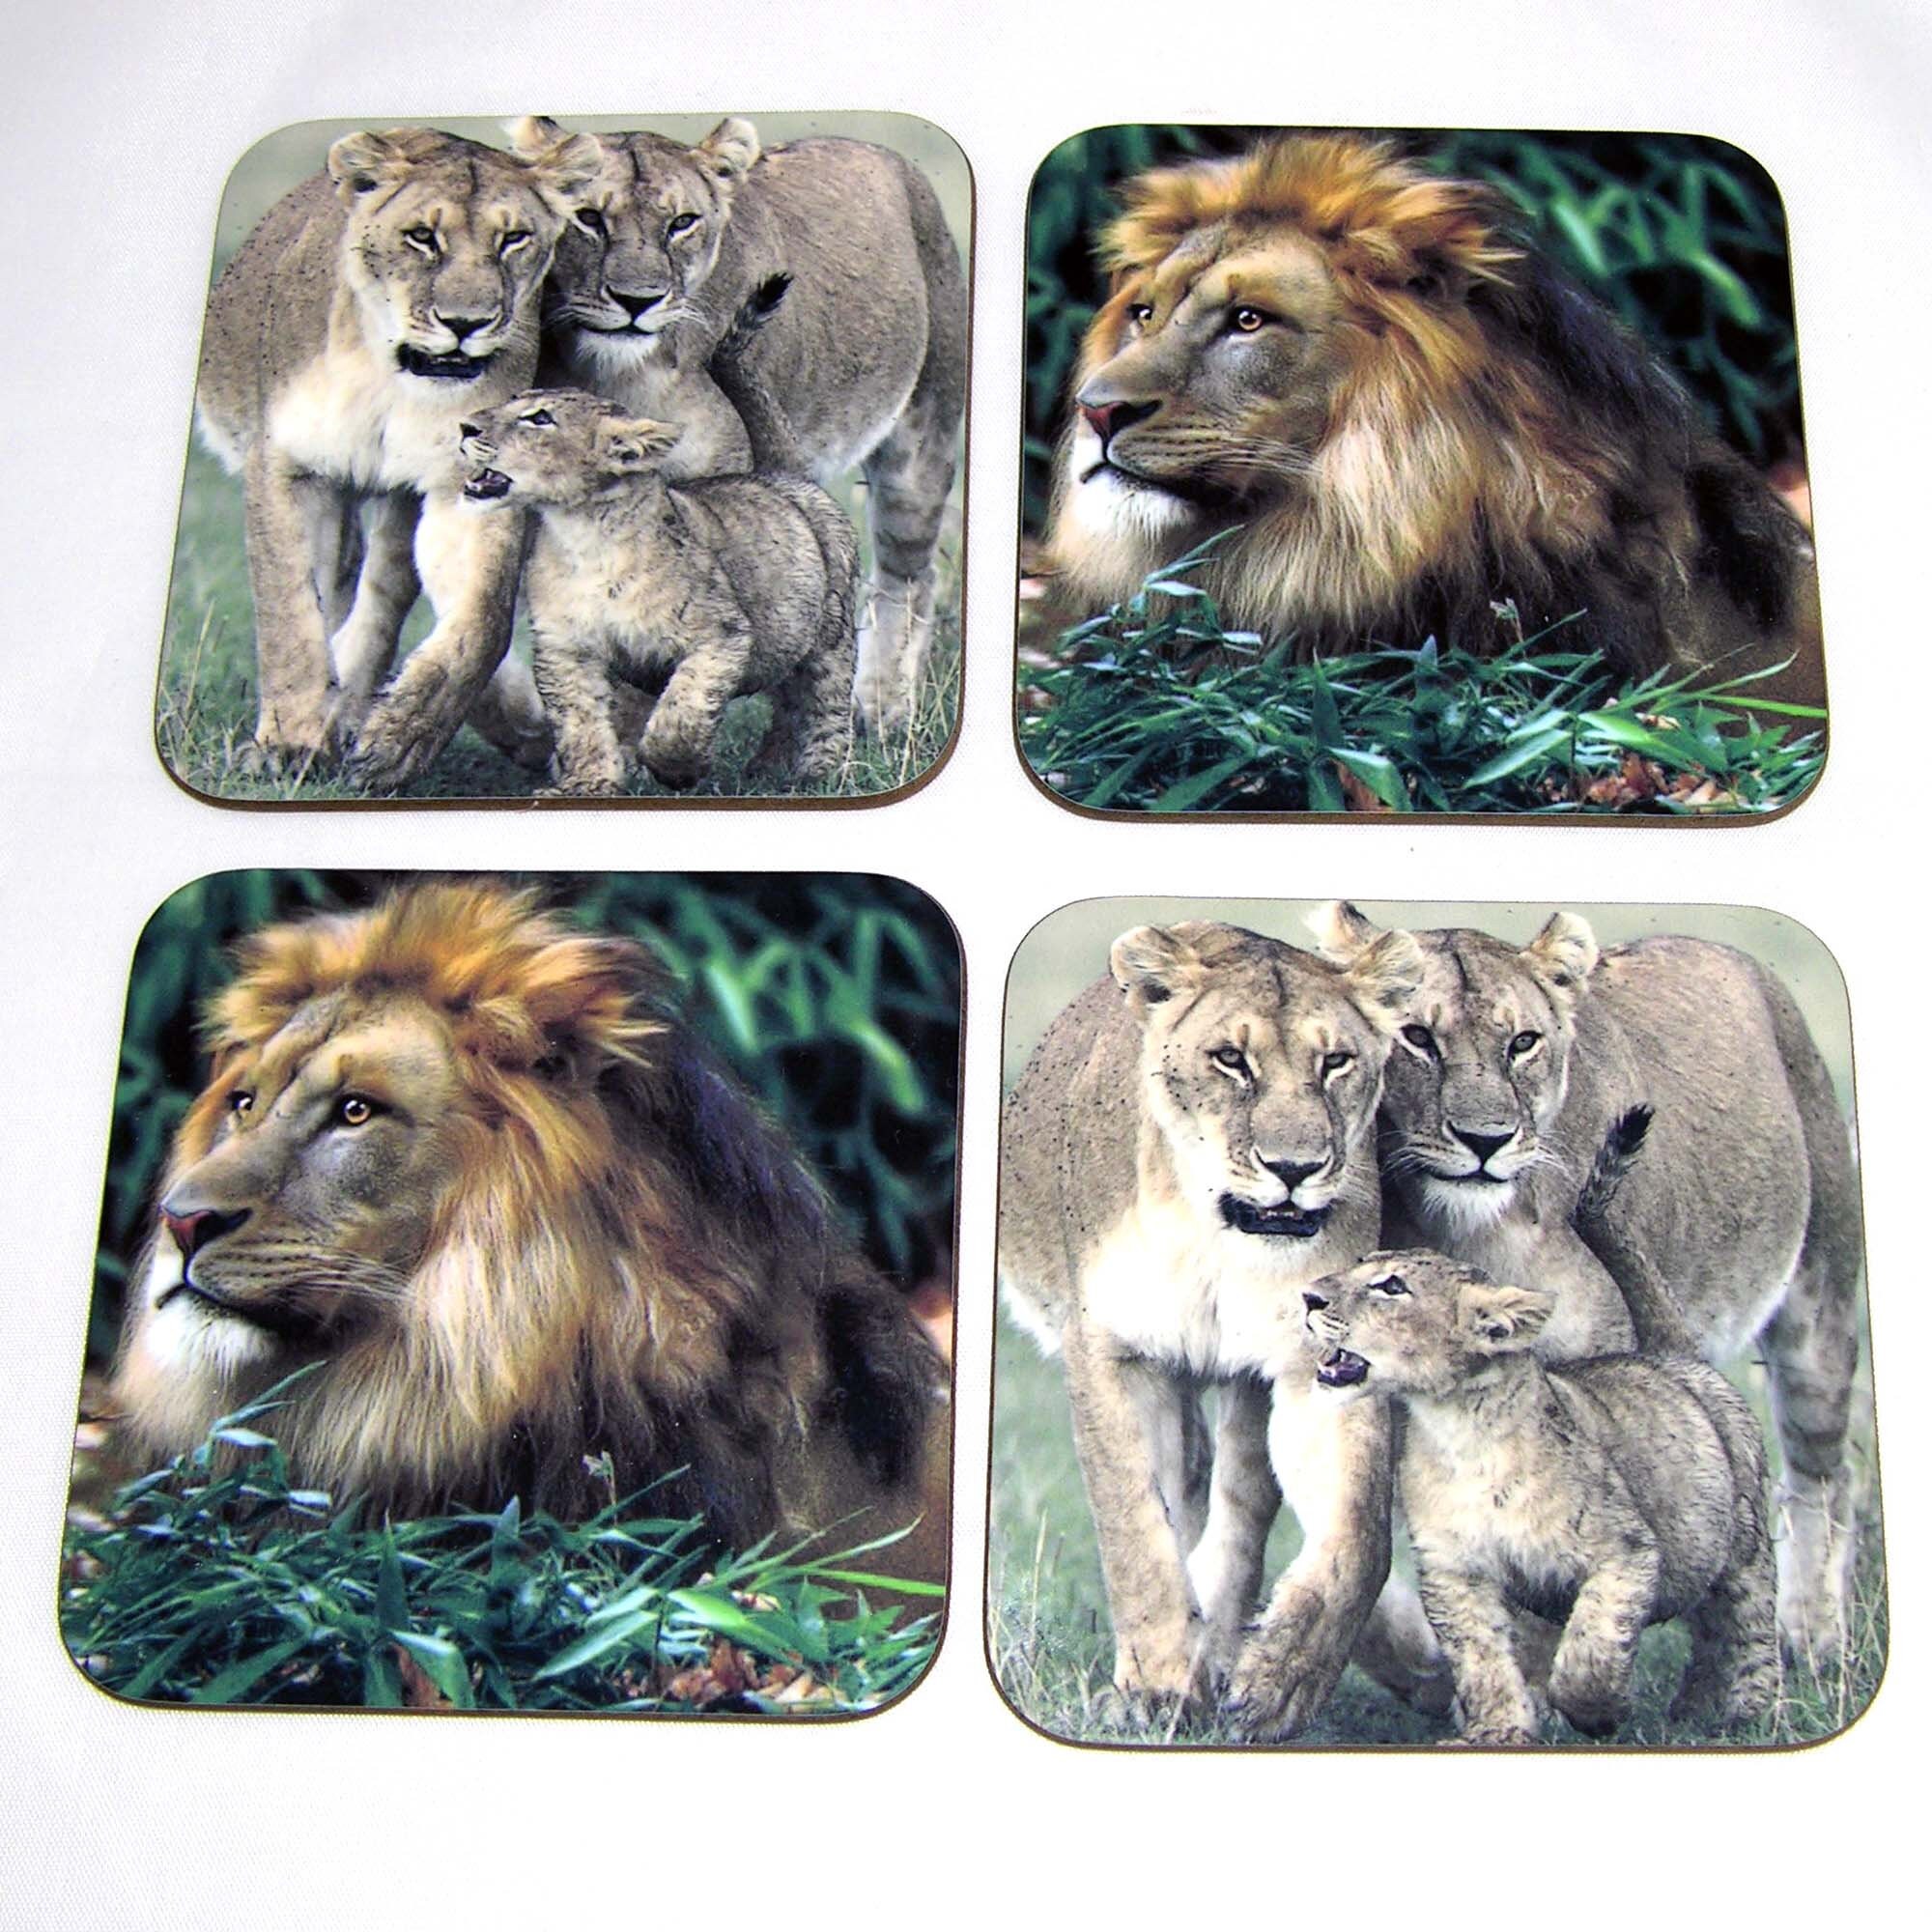 Pack of 4 Square Coaster Blanks. 2 Part Acrylic Coaster Blanks